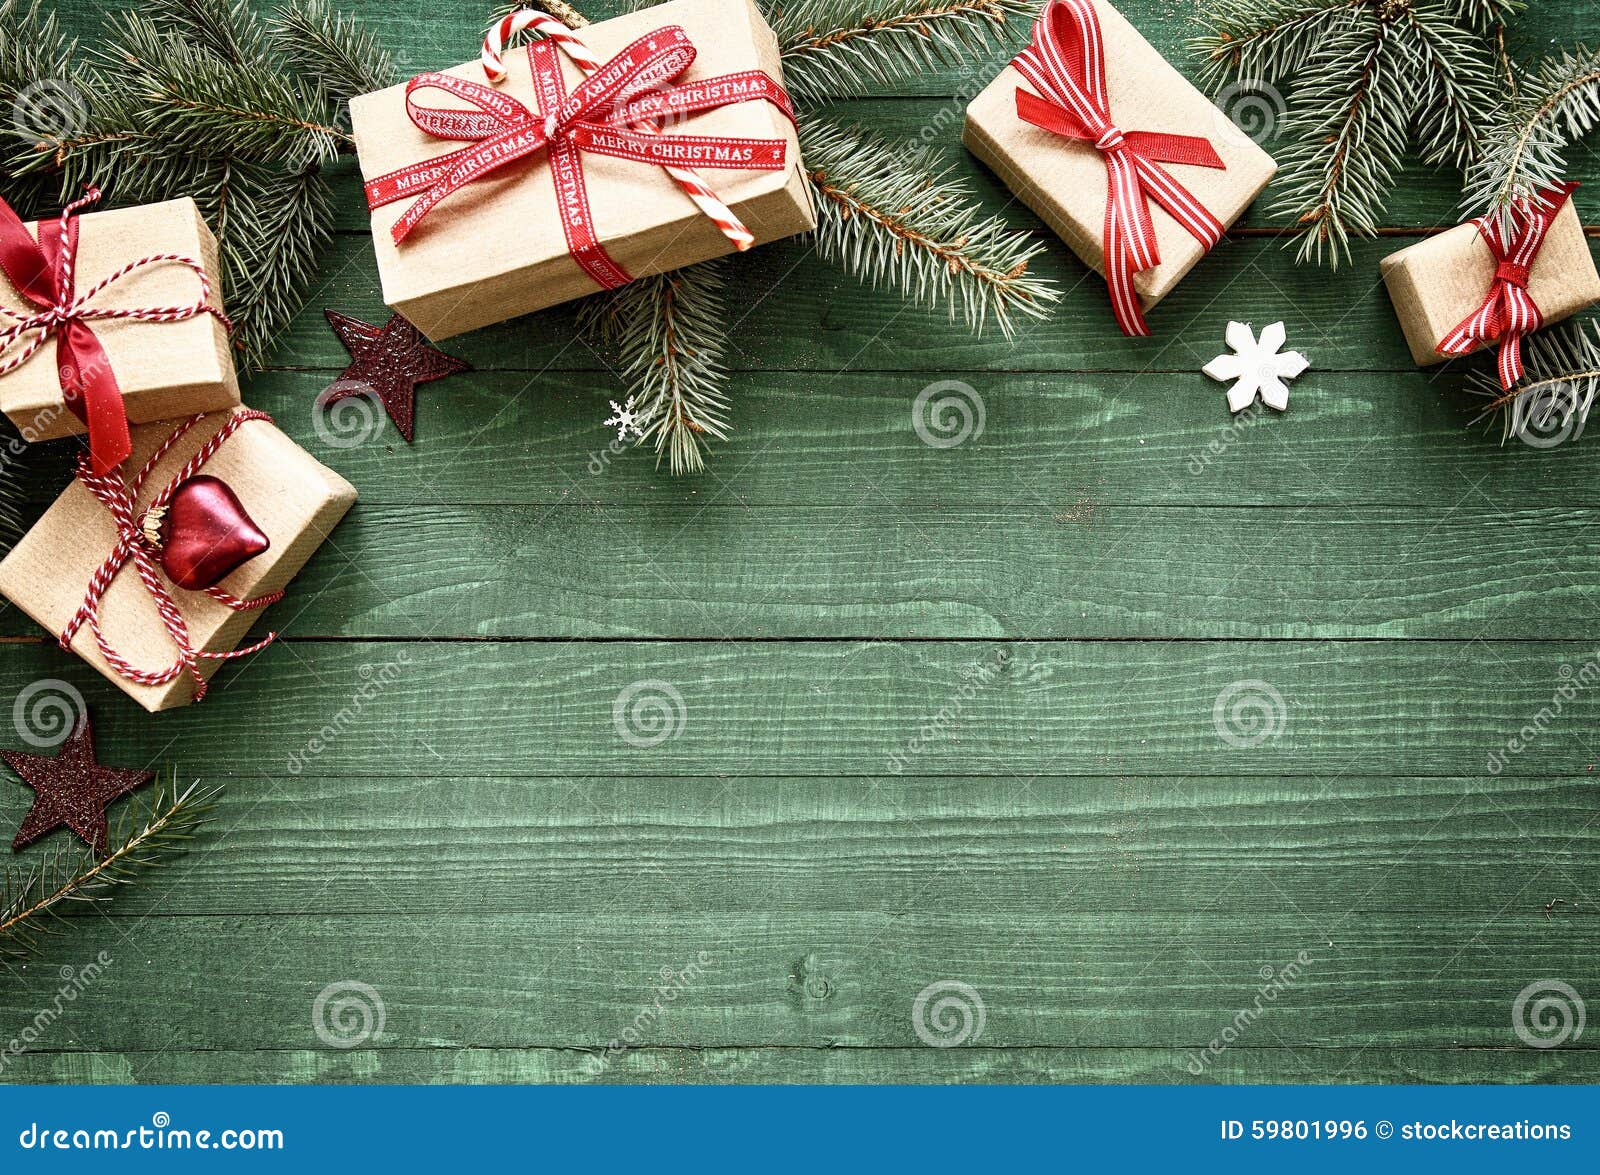 Pretty Christmas Holiday Border With Gifts Stock Photo 